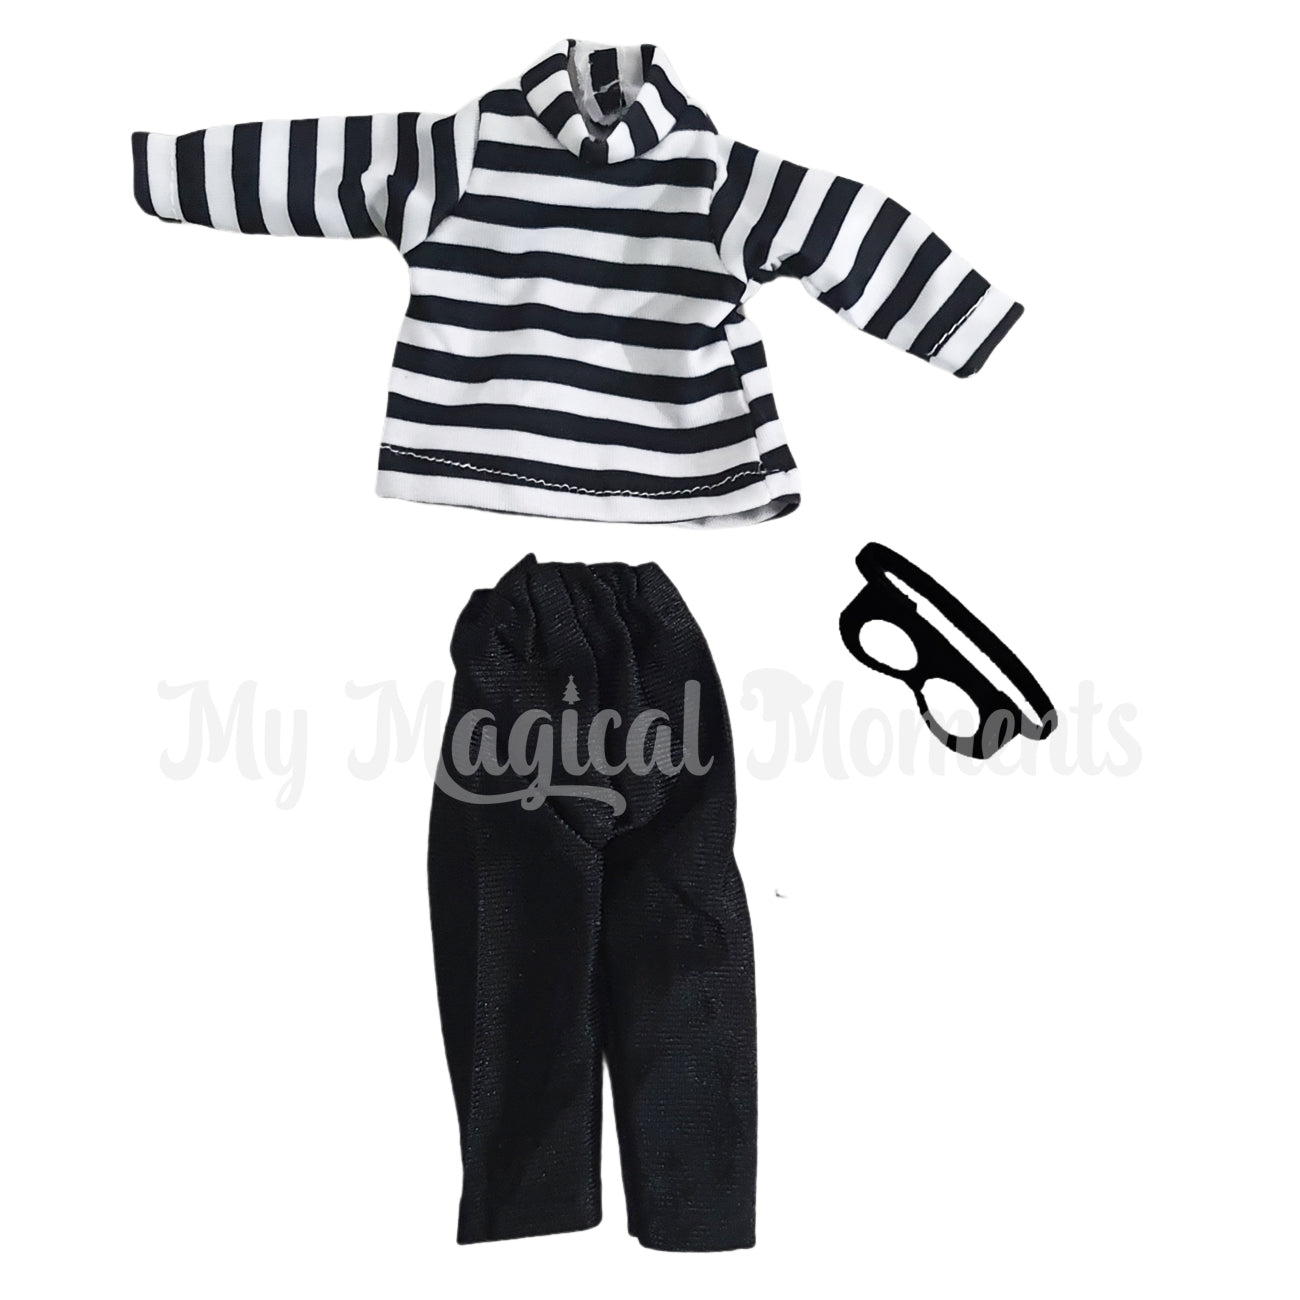 Burglar elf costume with black white striped top, black pants and face mask